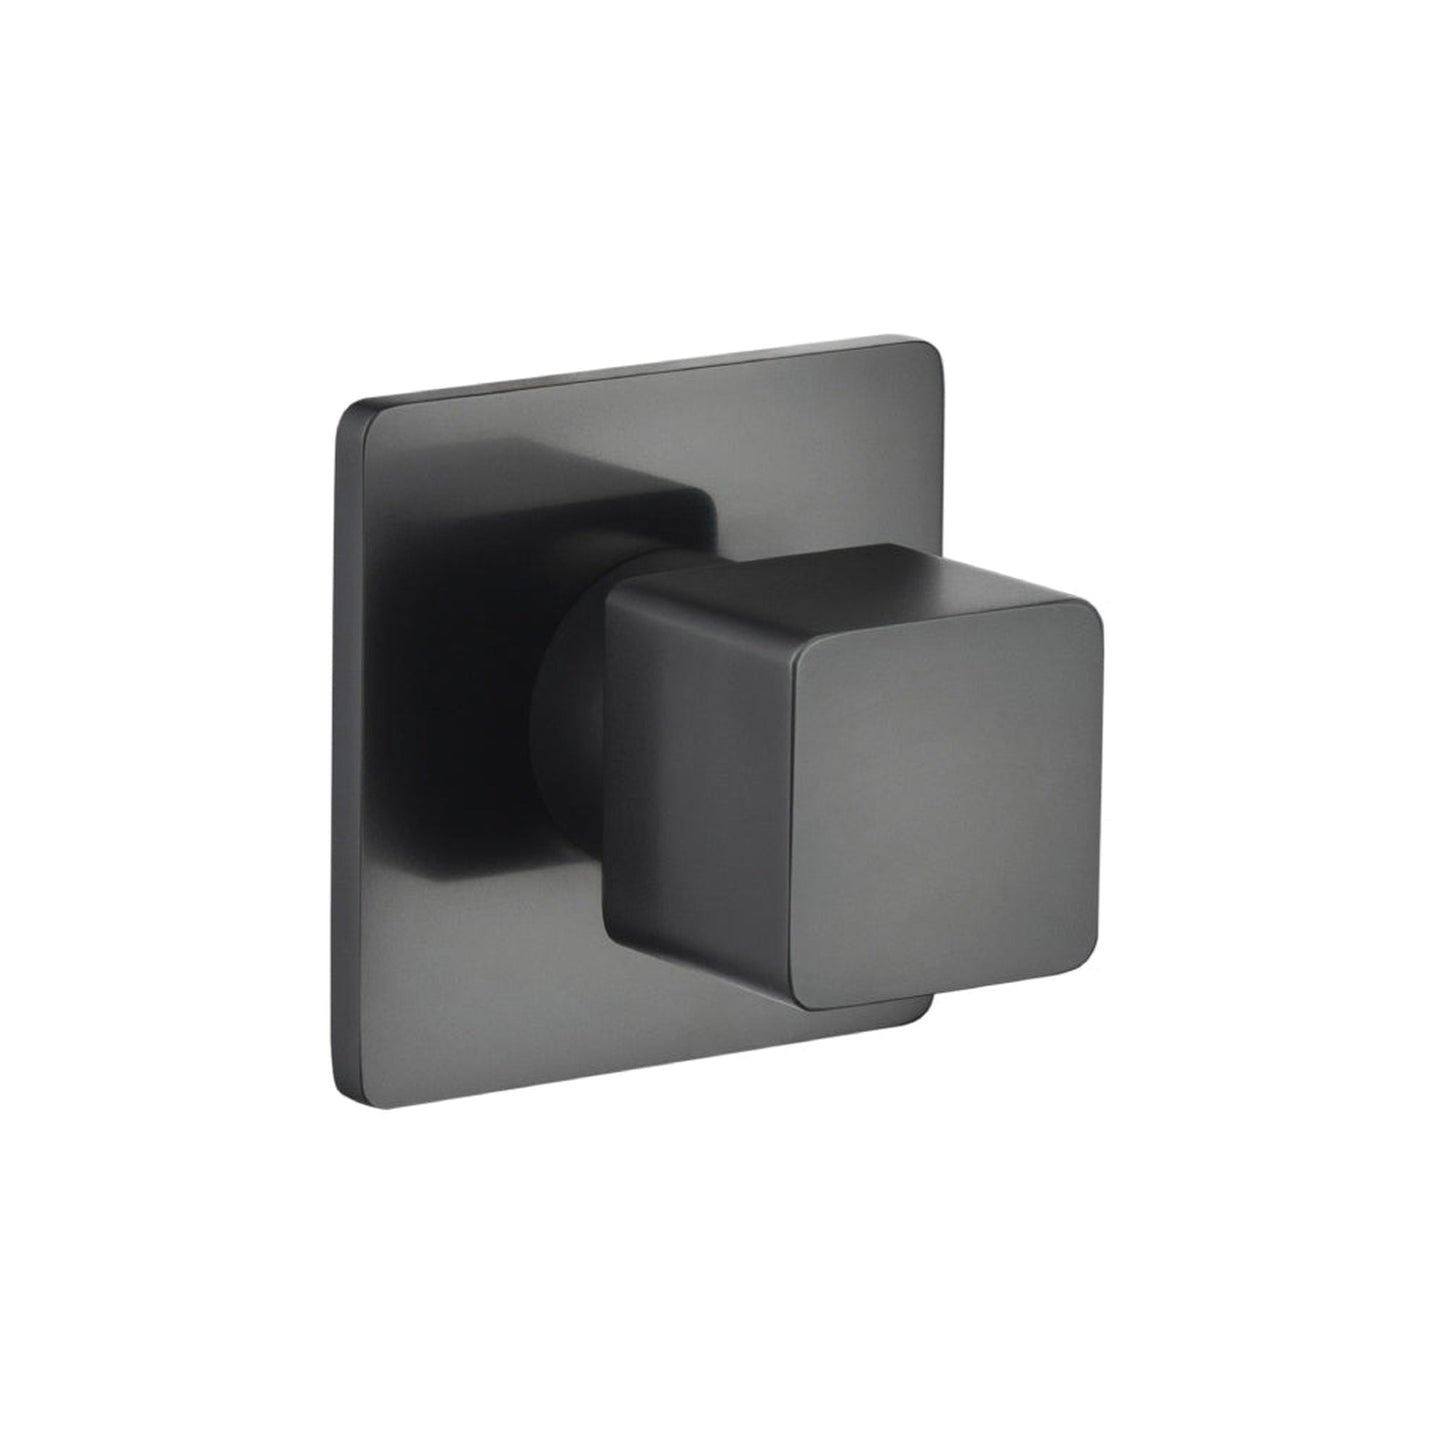 Isenberg Serie 196 3" Matte Black Wall Mounted Shower Faucet Trim With 0.75" Single-Output NPT Female Connection Volume Control Valve